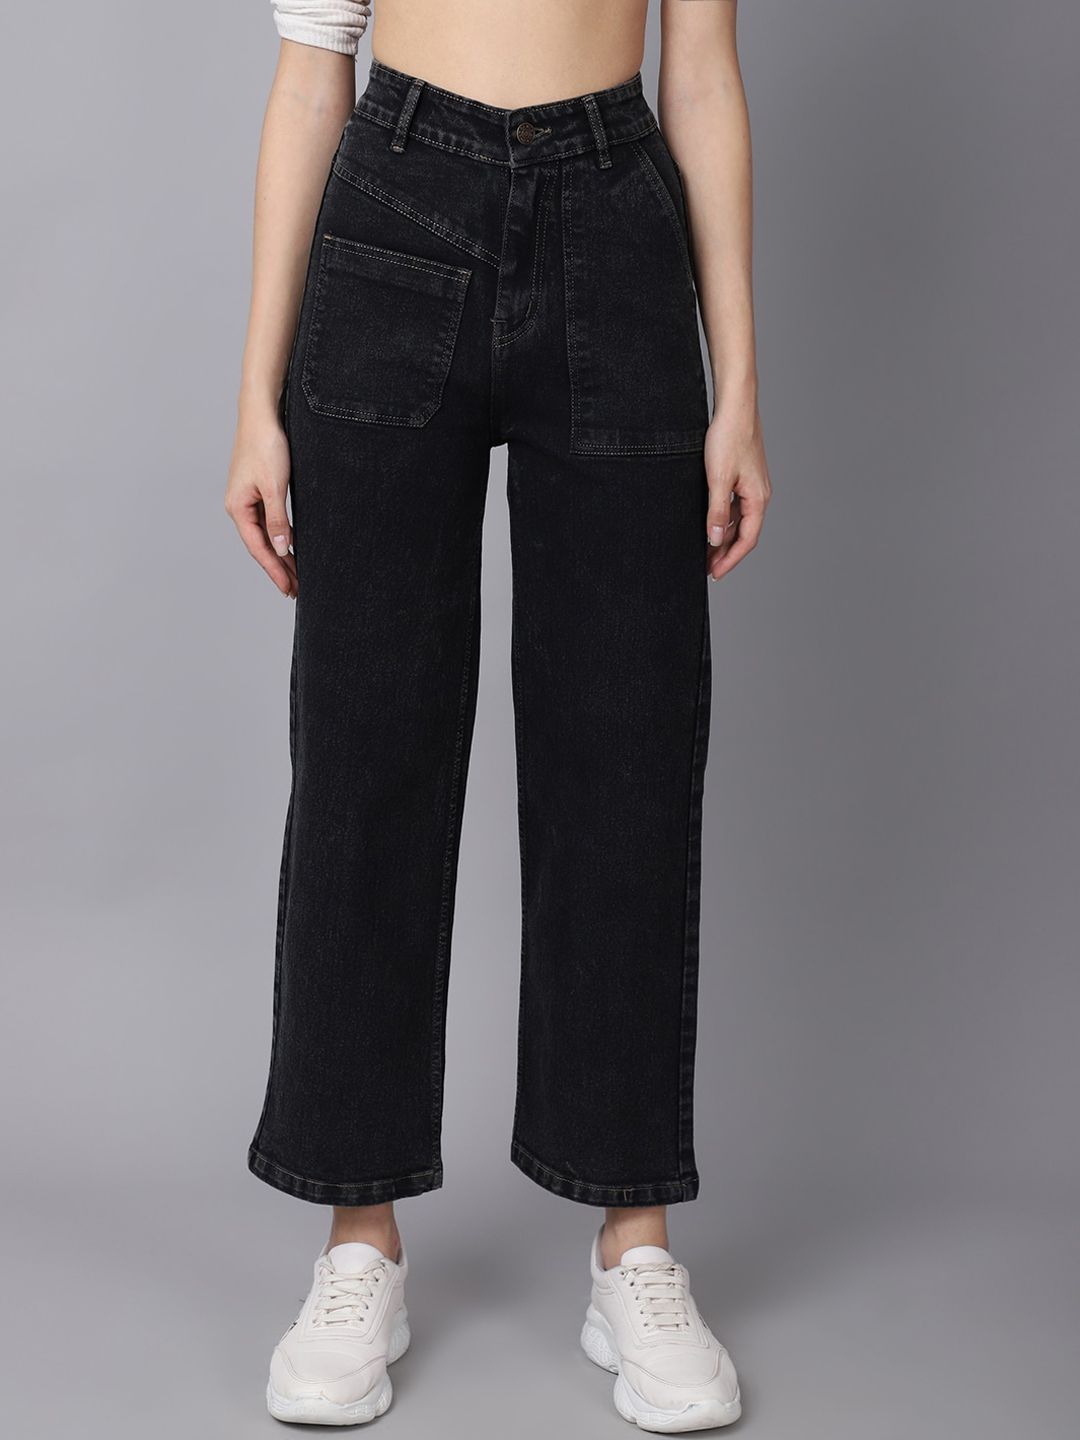 River Of Design Jeans Women Charcoal Wide Leg High-Rise Jeans Price in India